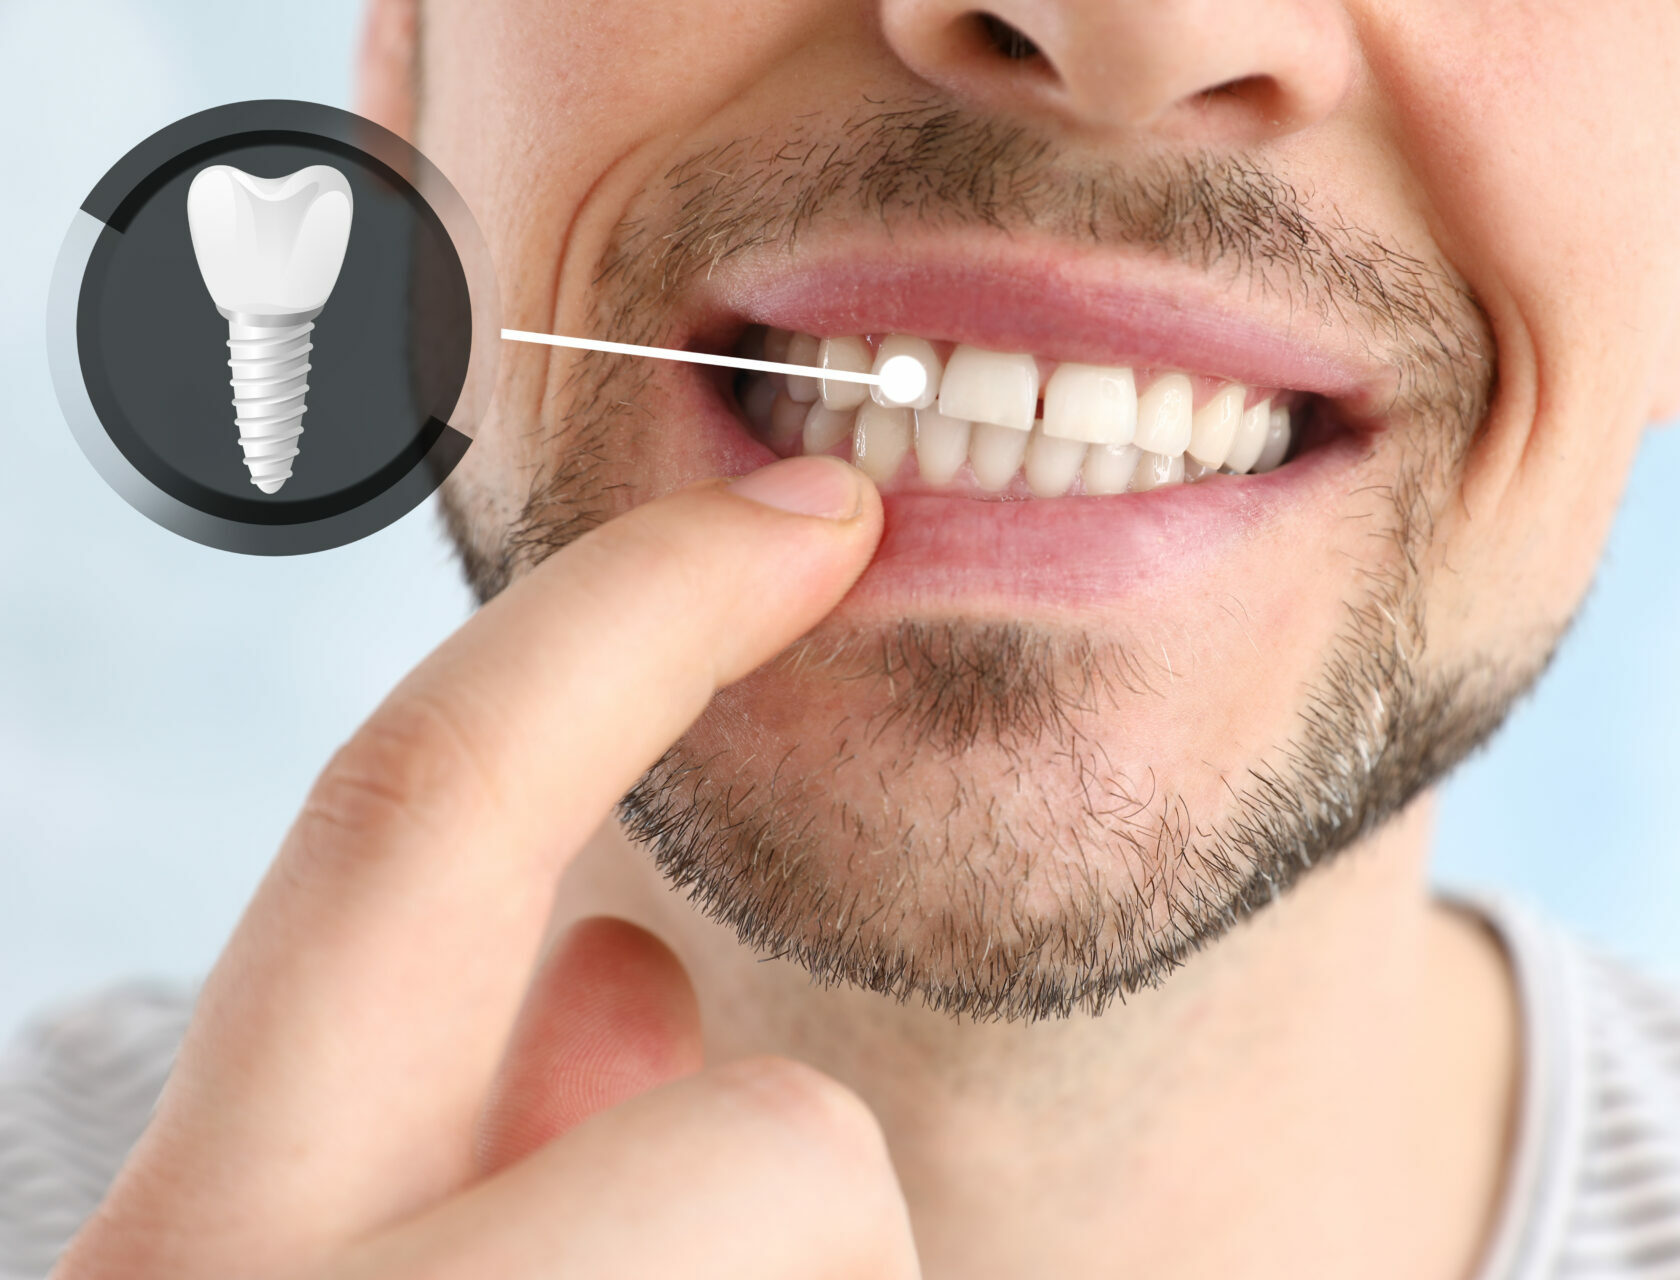 Man showing implanted teeth on light background, closeup